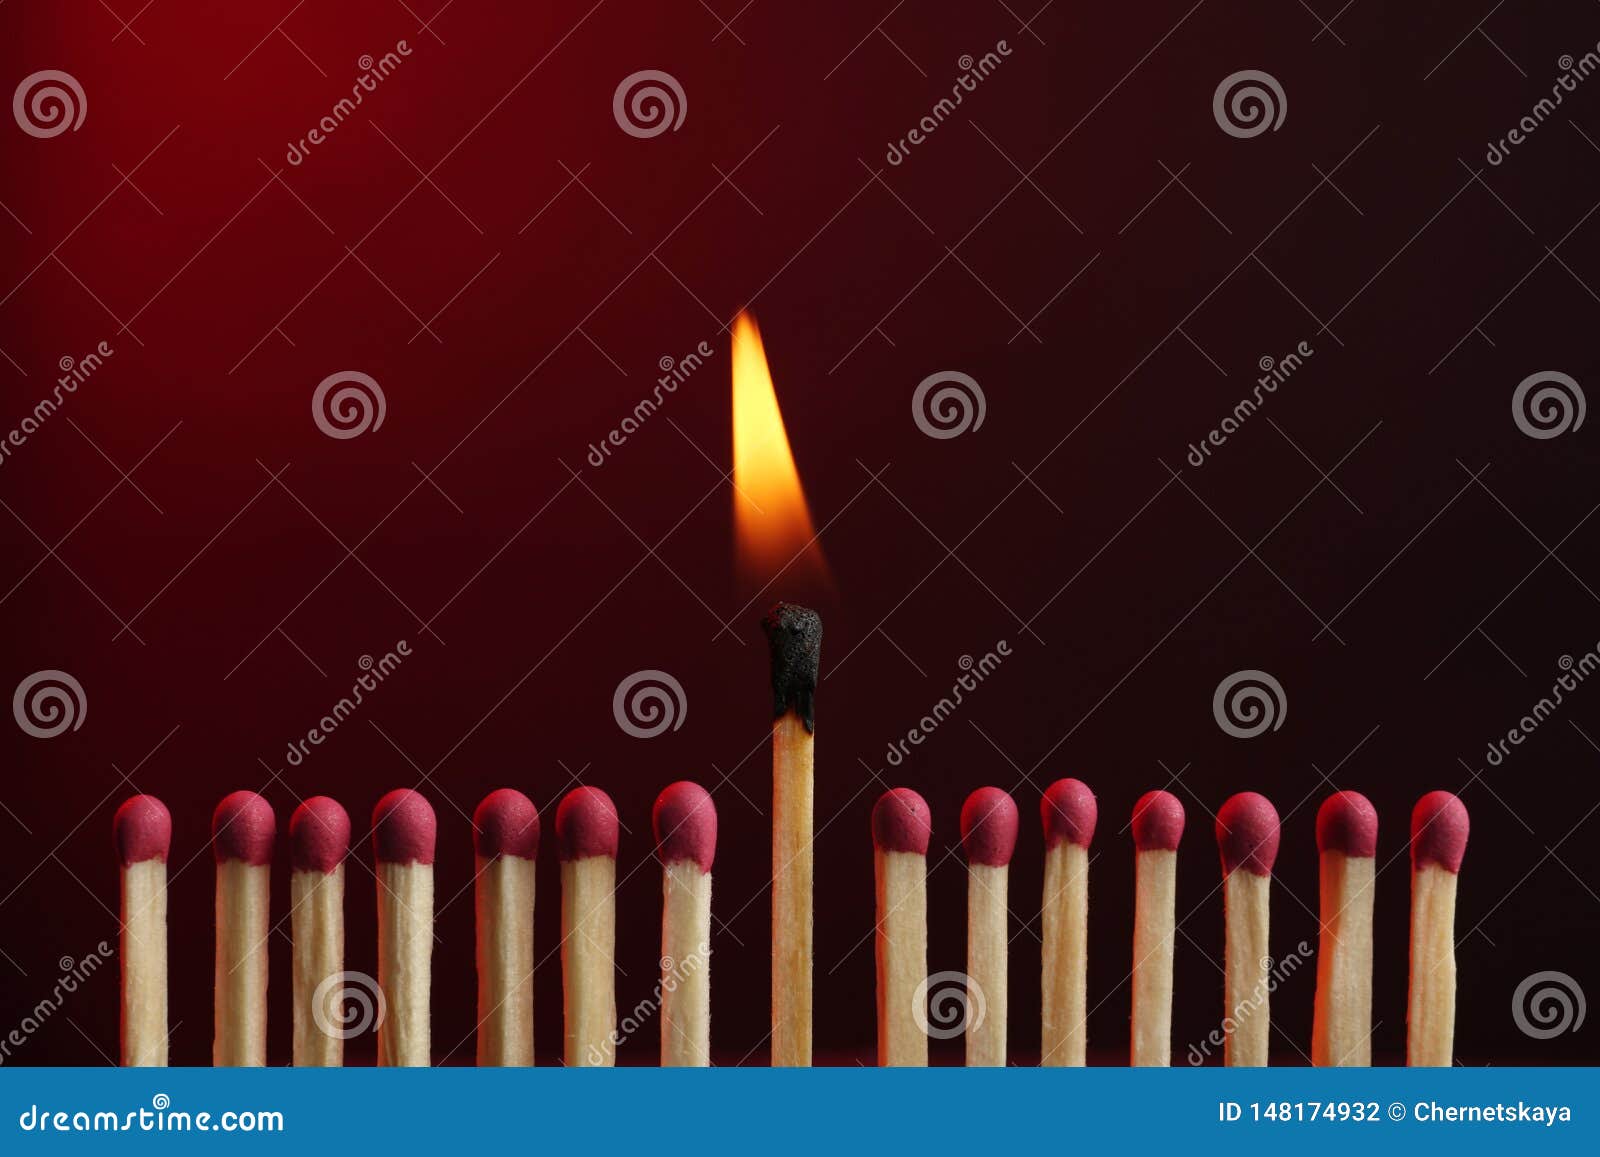 Burning Match Among Others. Difference And Uniqueness Concept Stock ...